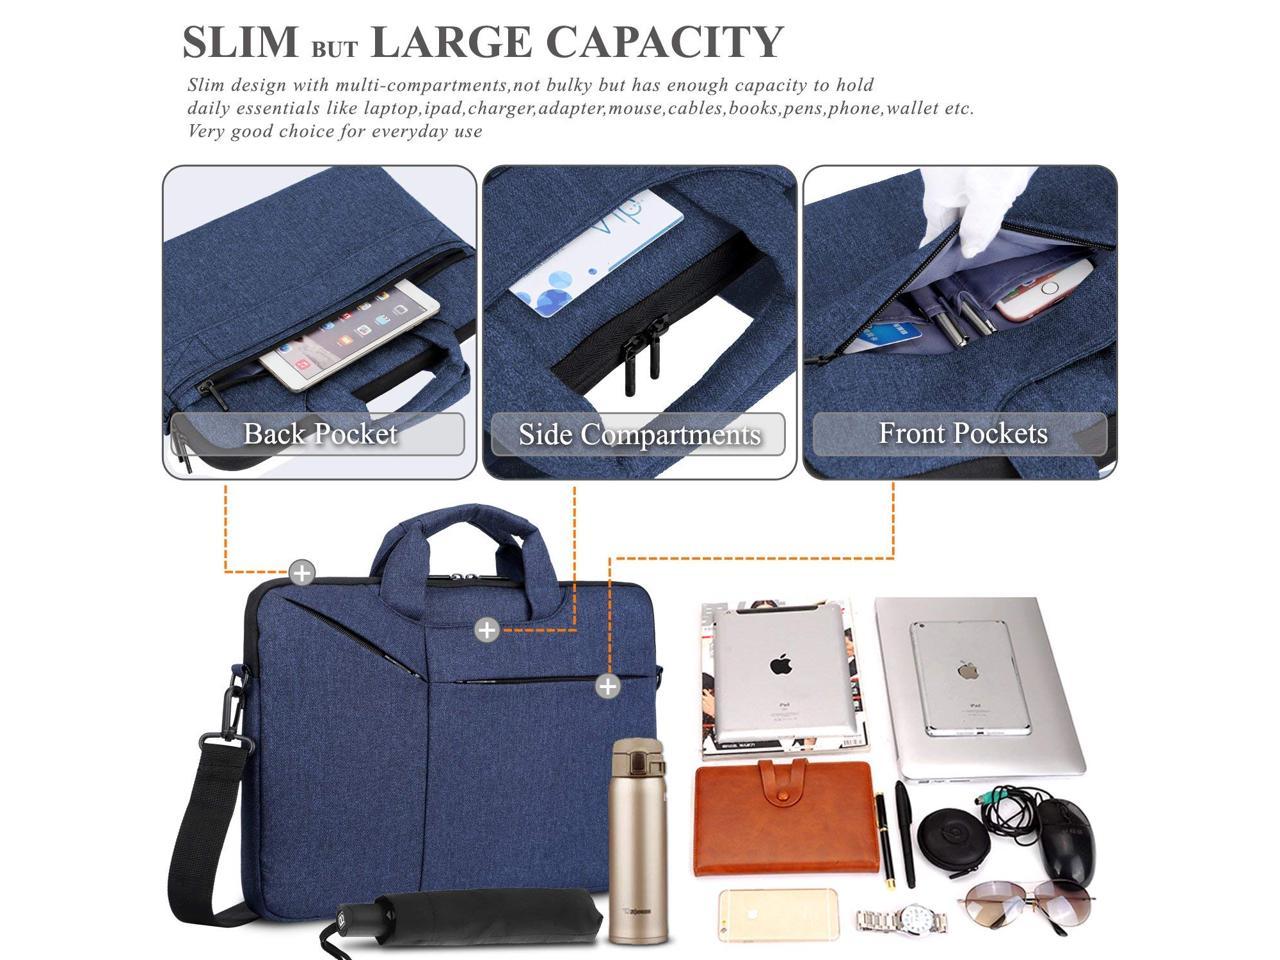 Jiali Laptop Sleeve Case Portable Diamond Pattern Portable Waterproof Sleeve Case Double Zipper Briefcase Laptop Carrying Bag for 15-15.4 inch Laptops Dark Blue Color : Tarnish